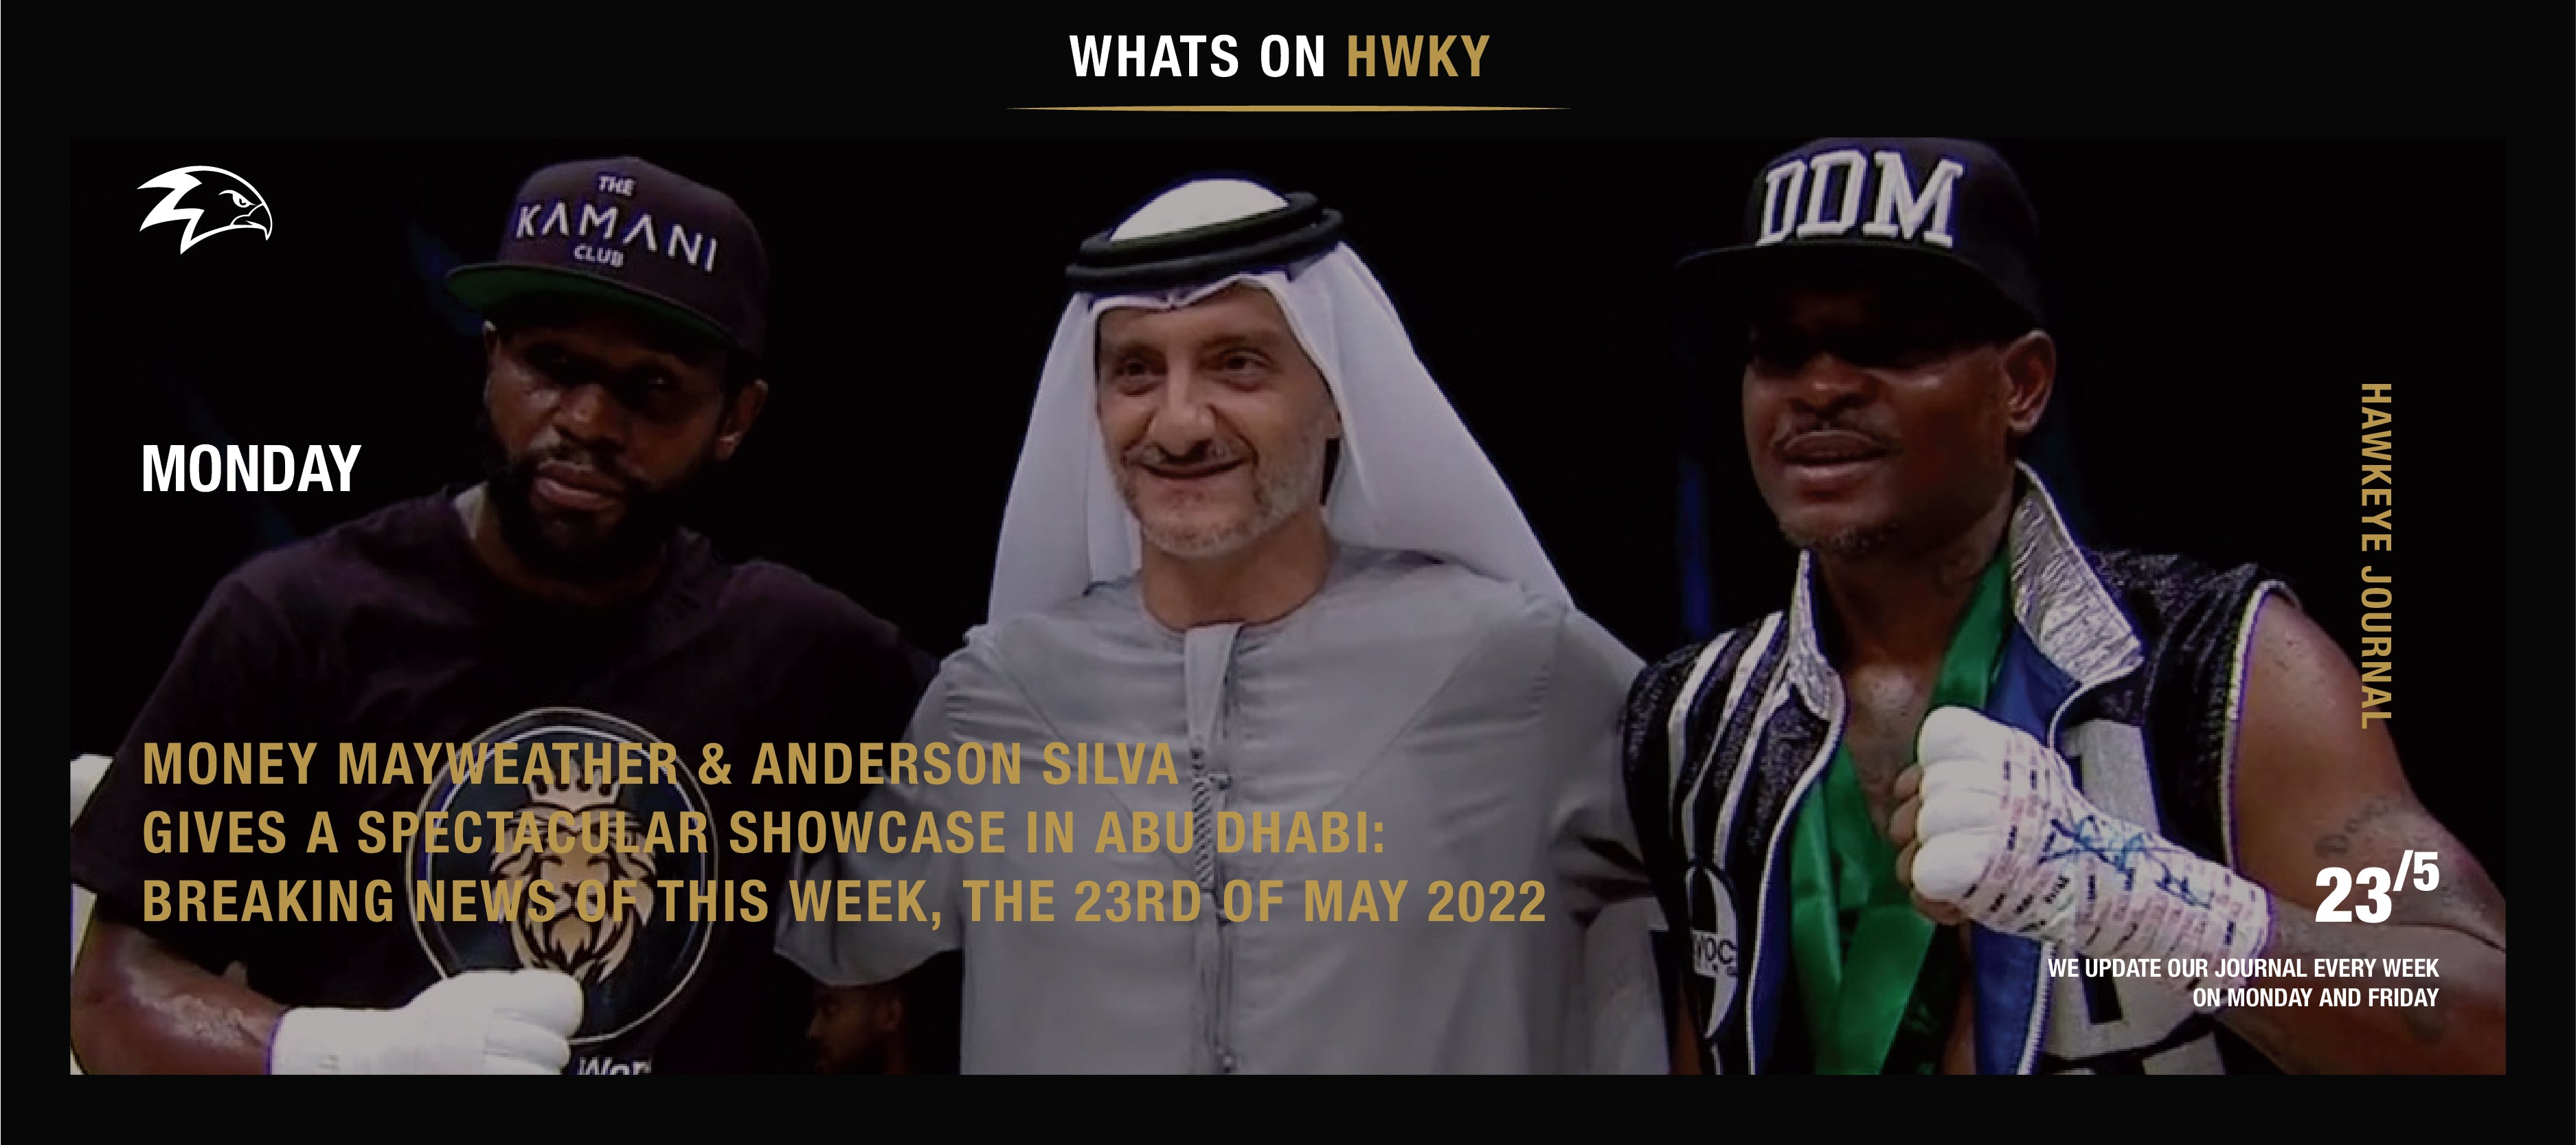 MONEY MAYWEATHER & ANDERSON SILVA GIVES A SPECTACULAR SHOWCASE IN ABU DHAB